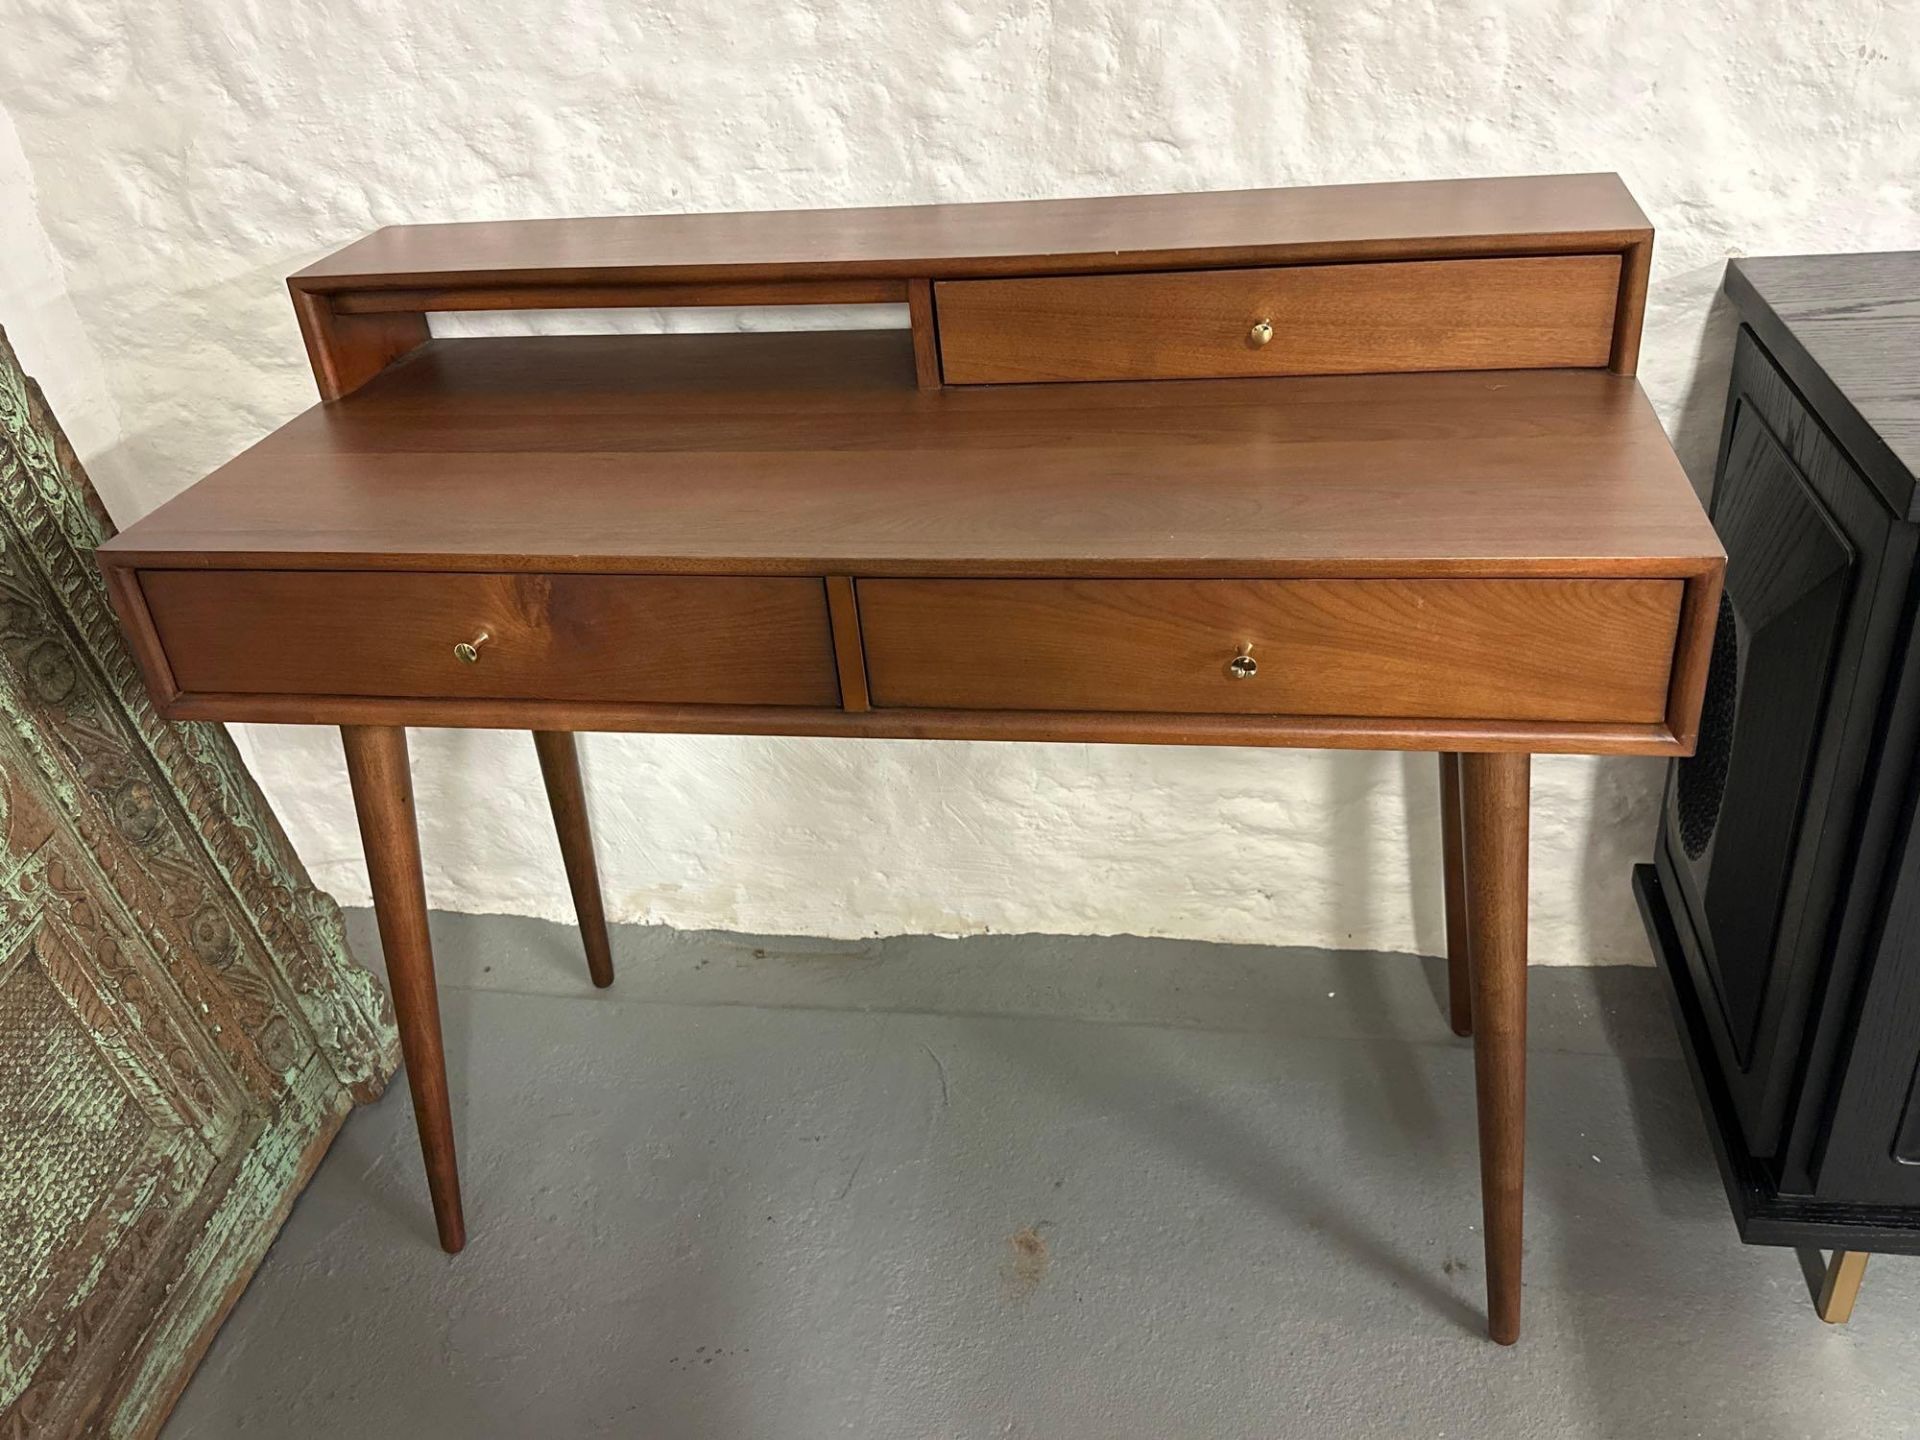 Bailey Desk and Stool Stylish deep brown tones and a smooth finish make this dressing table/desk & - Bild 2 aus 11